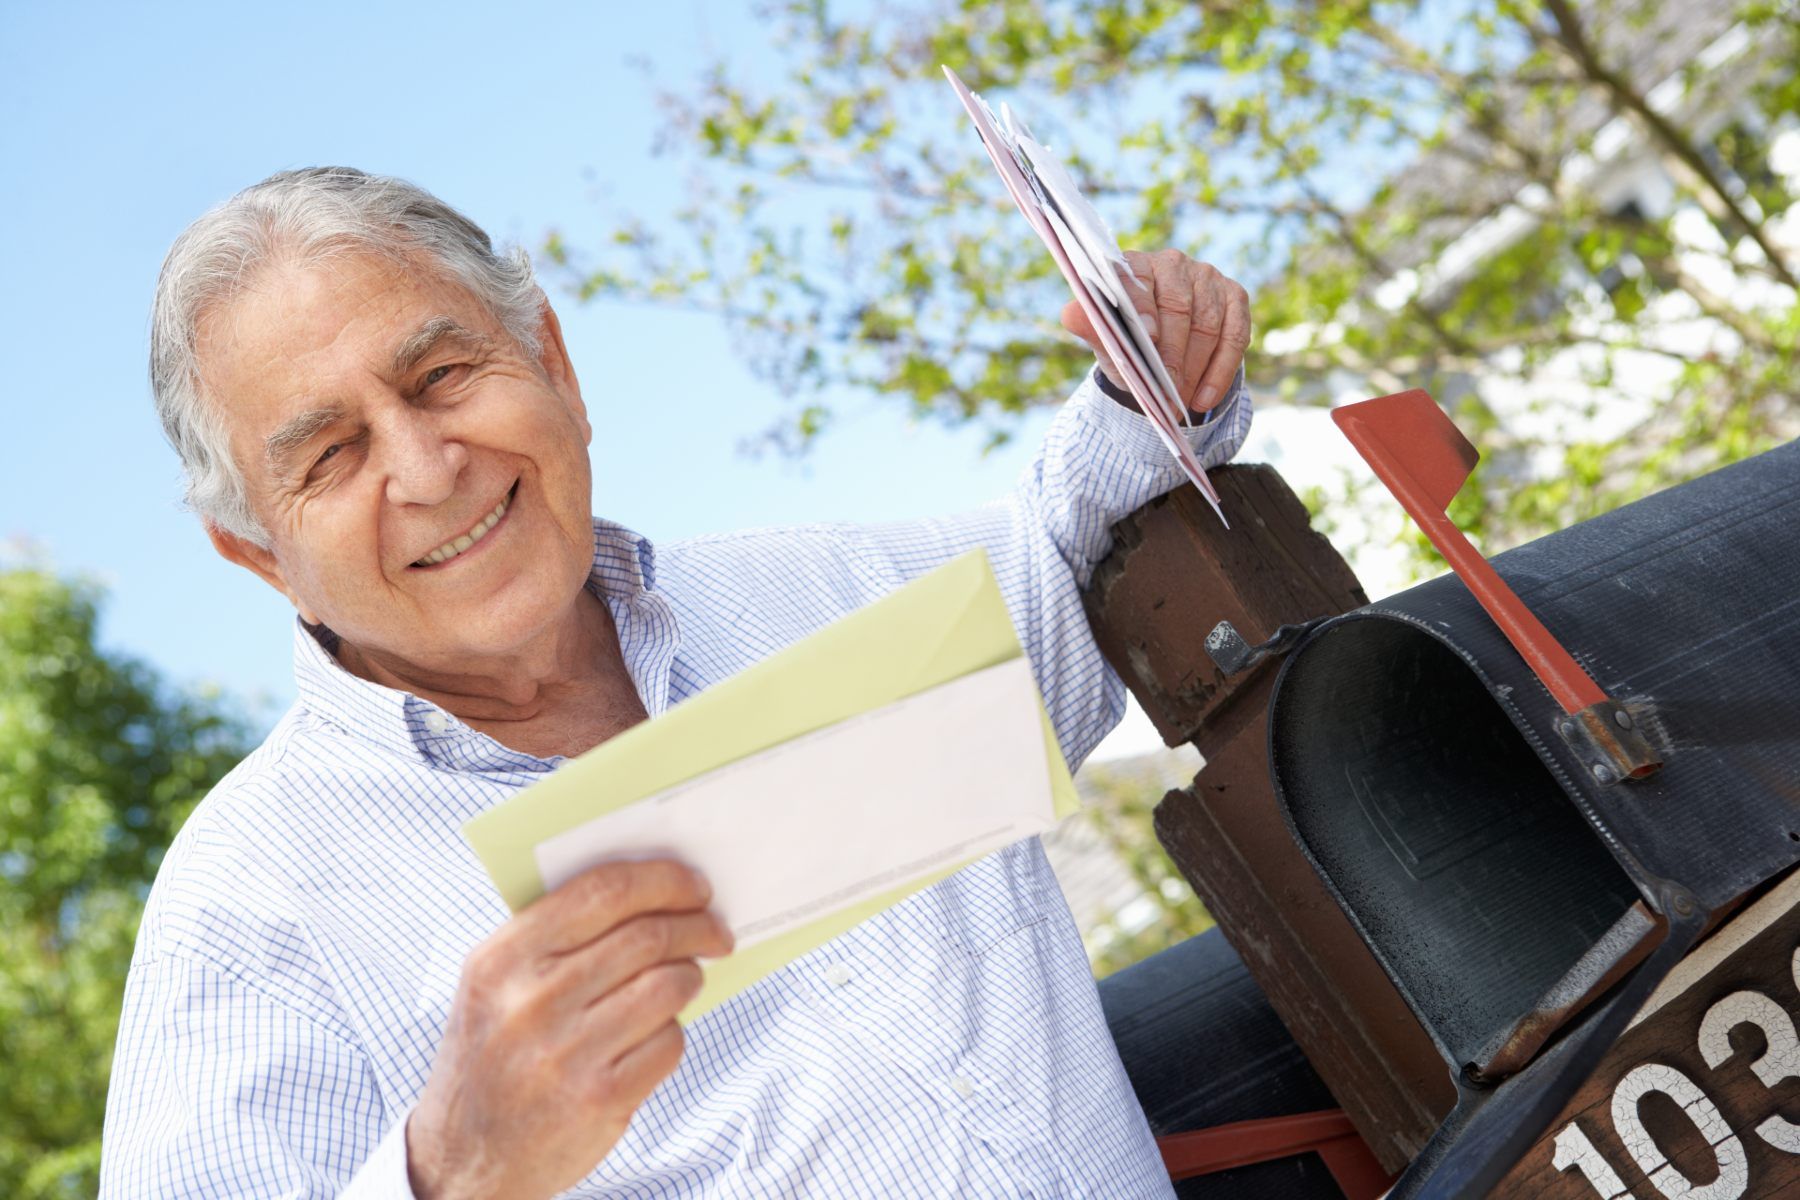 A happy man with gray hair checks his mail - FTC refunds